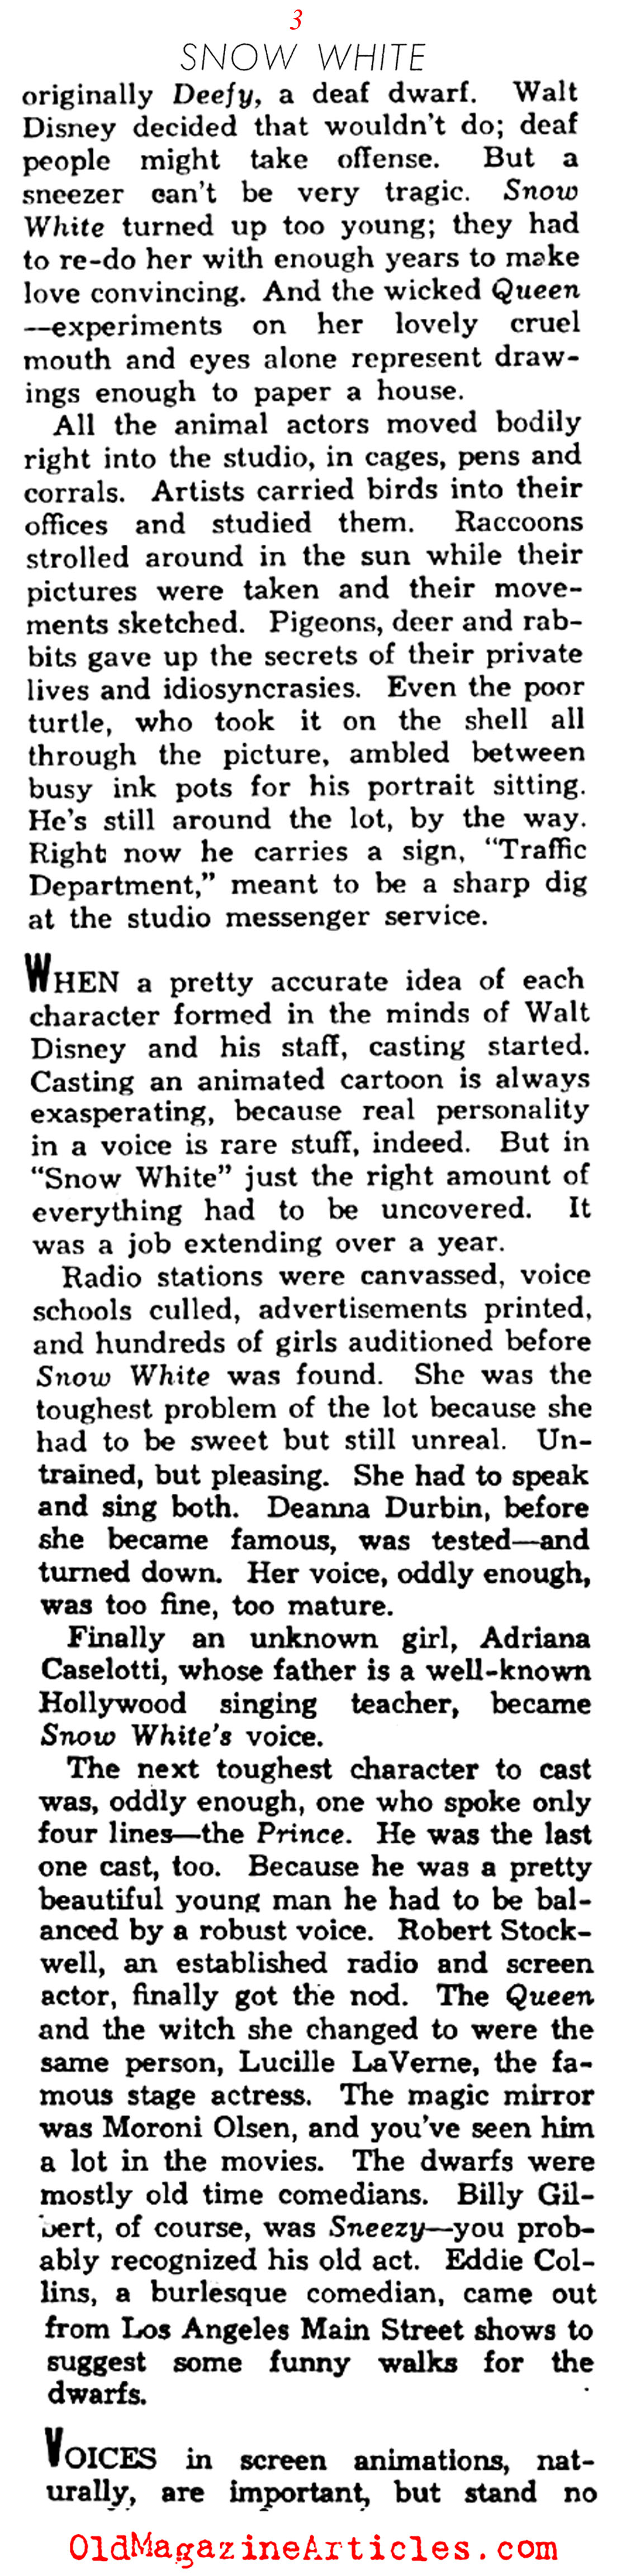 The Making of <i>Snow White and the Seven Dwarfs</i> (Photoplay Magazine, 1938)